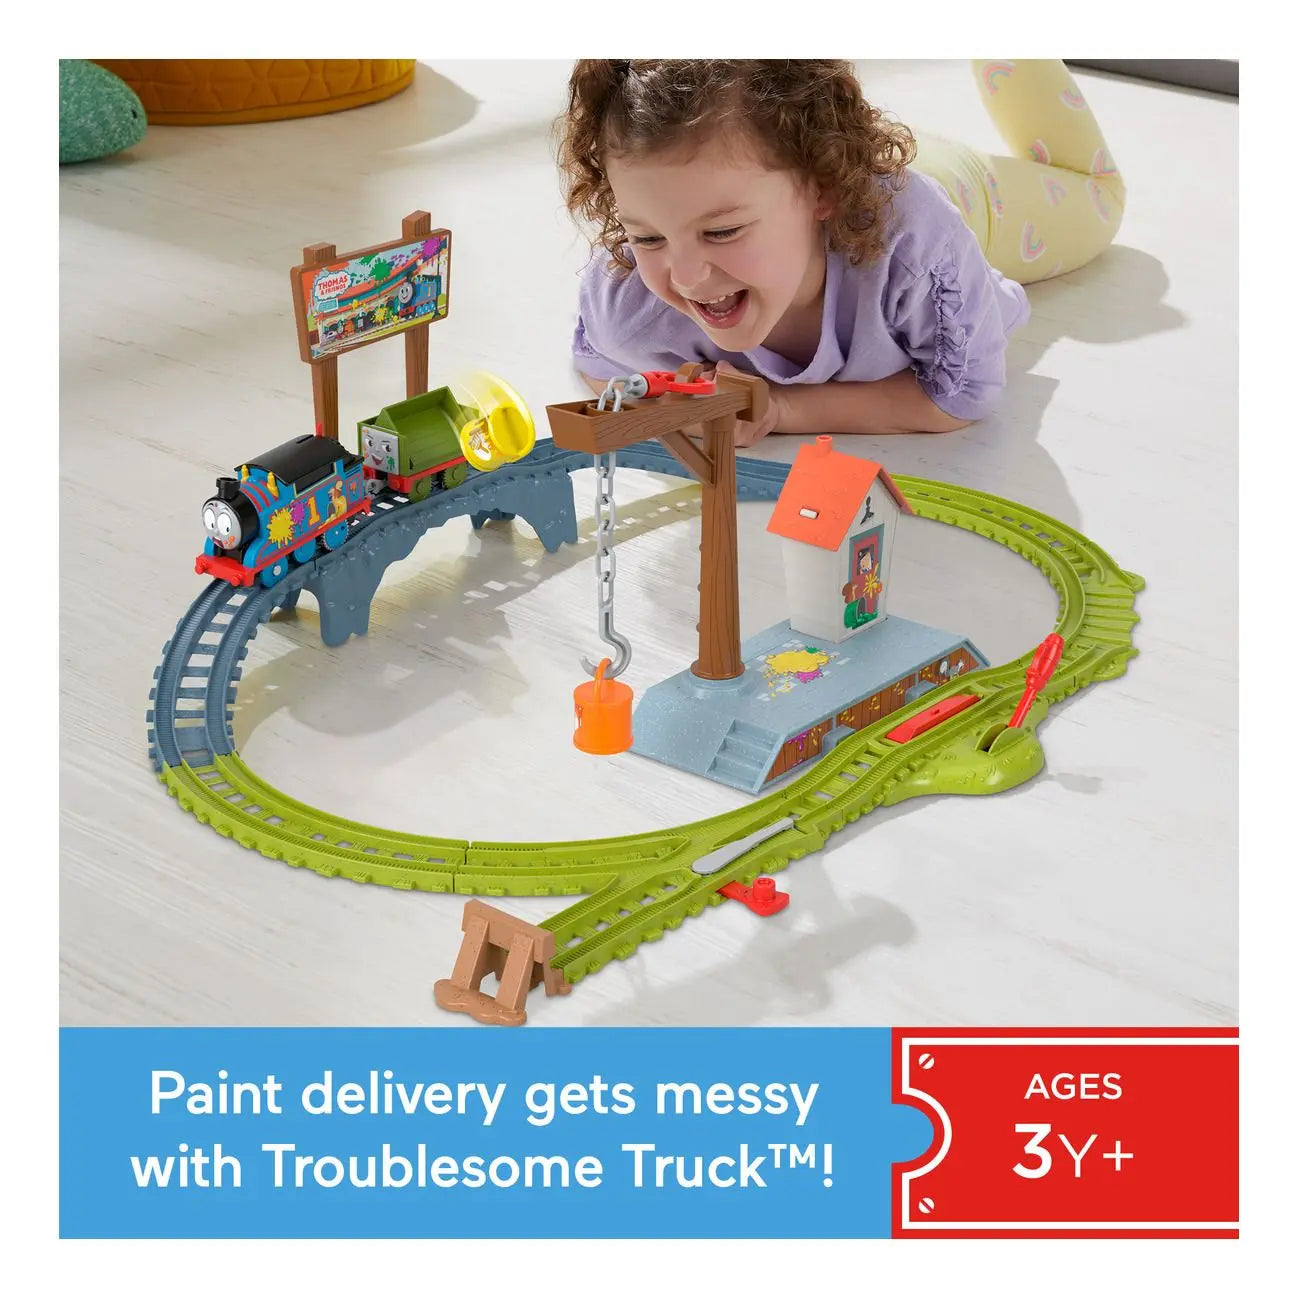 Thomas & Friends Topsy Turvy Paint Delivery Set Thomas & Friends